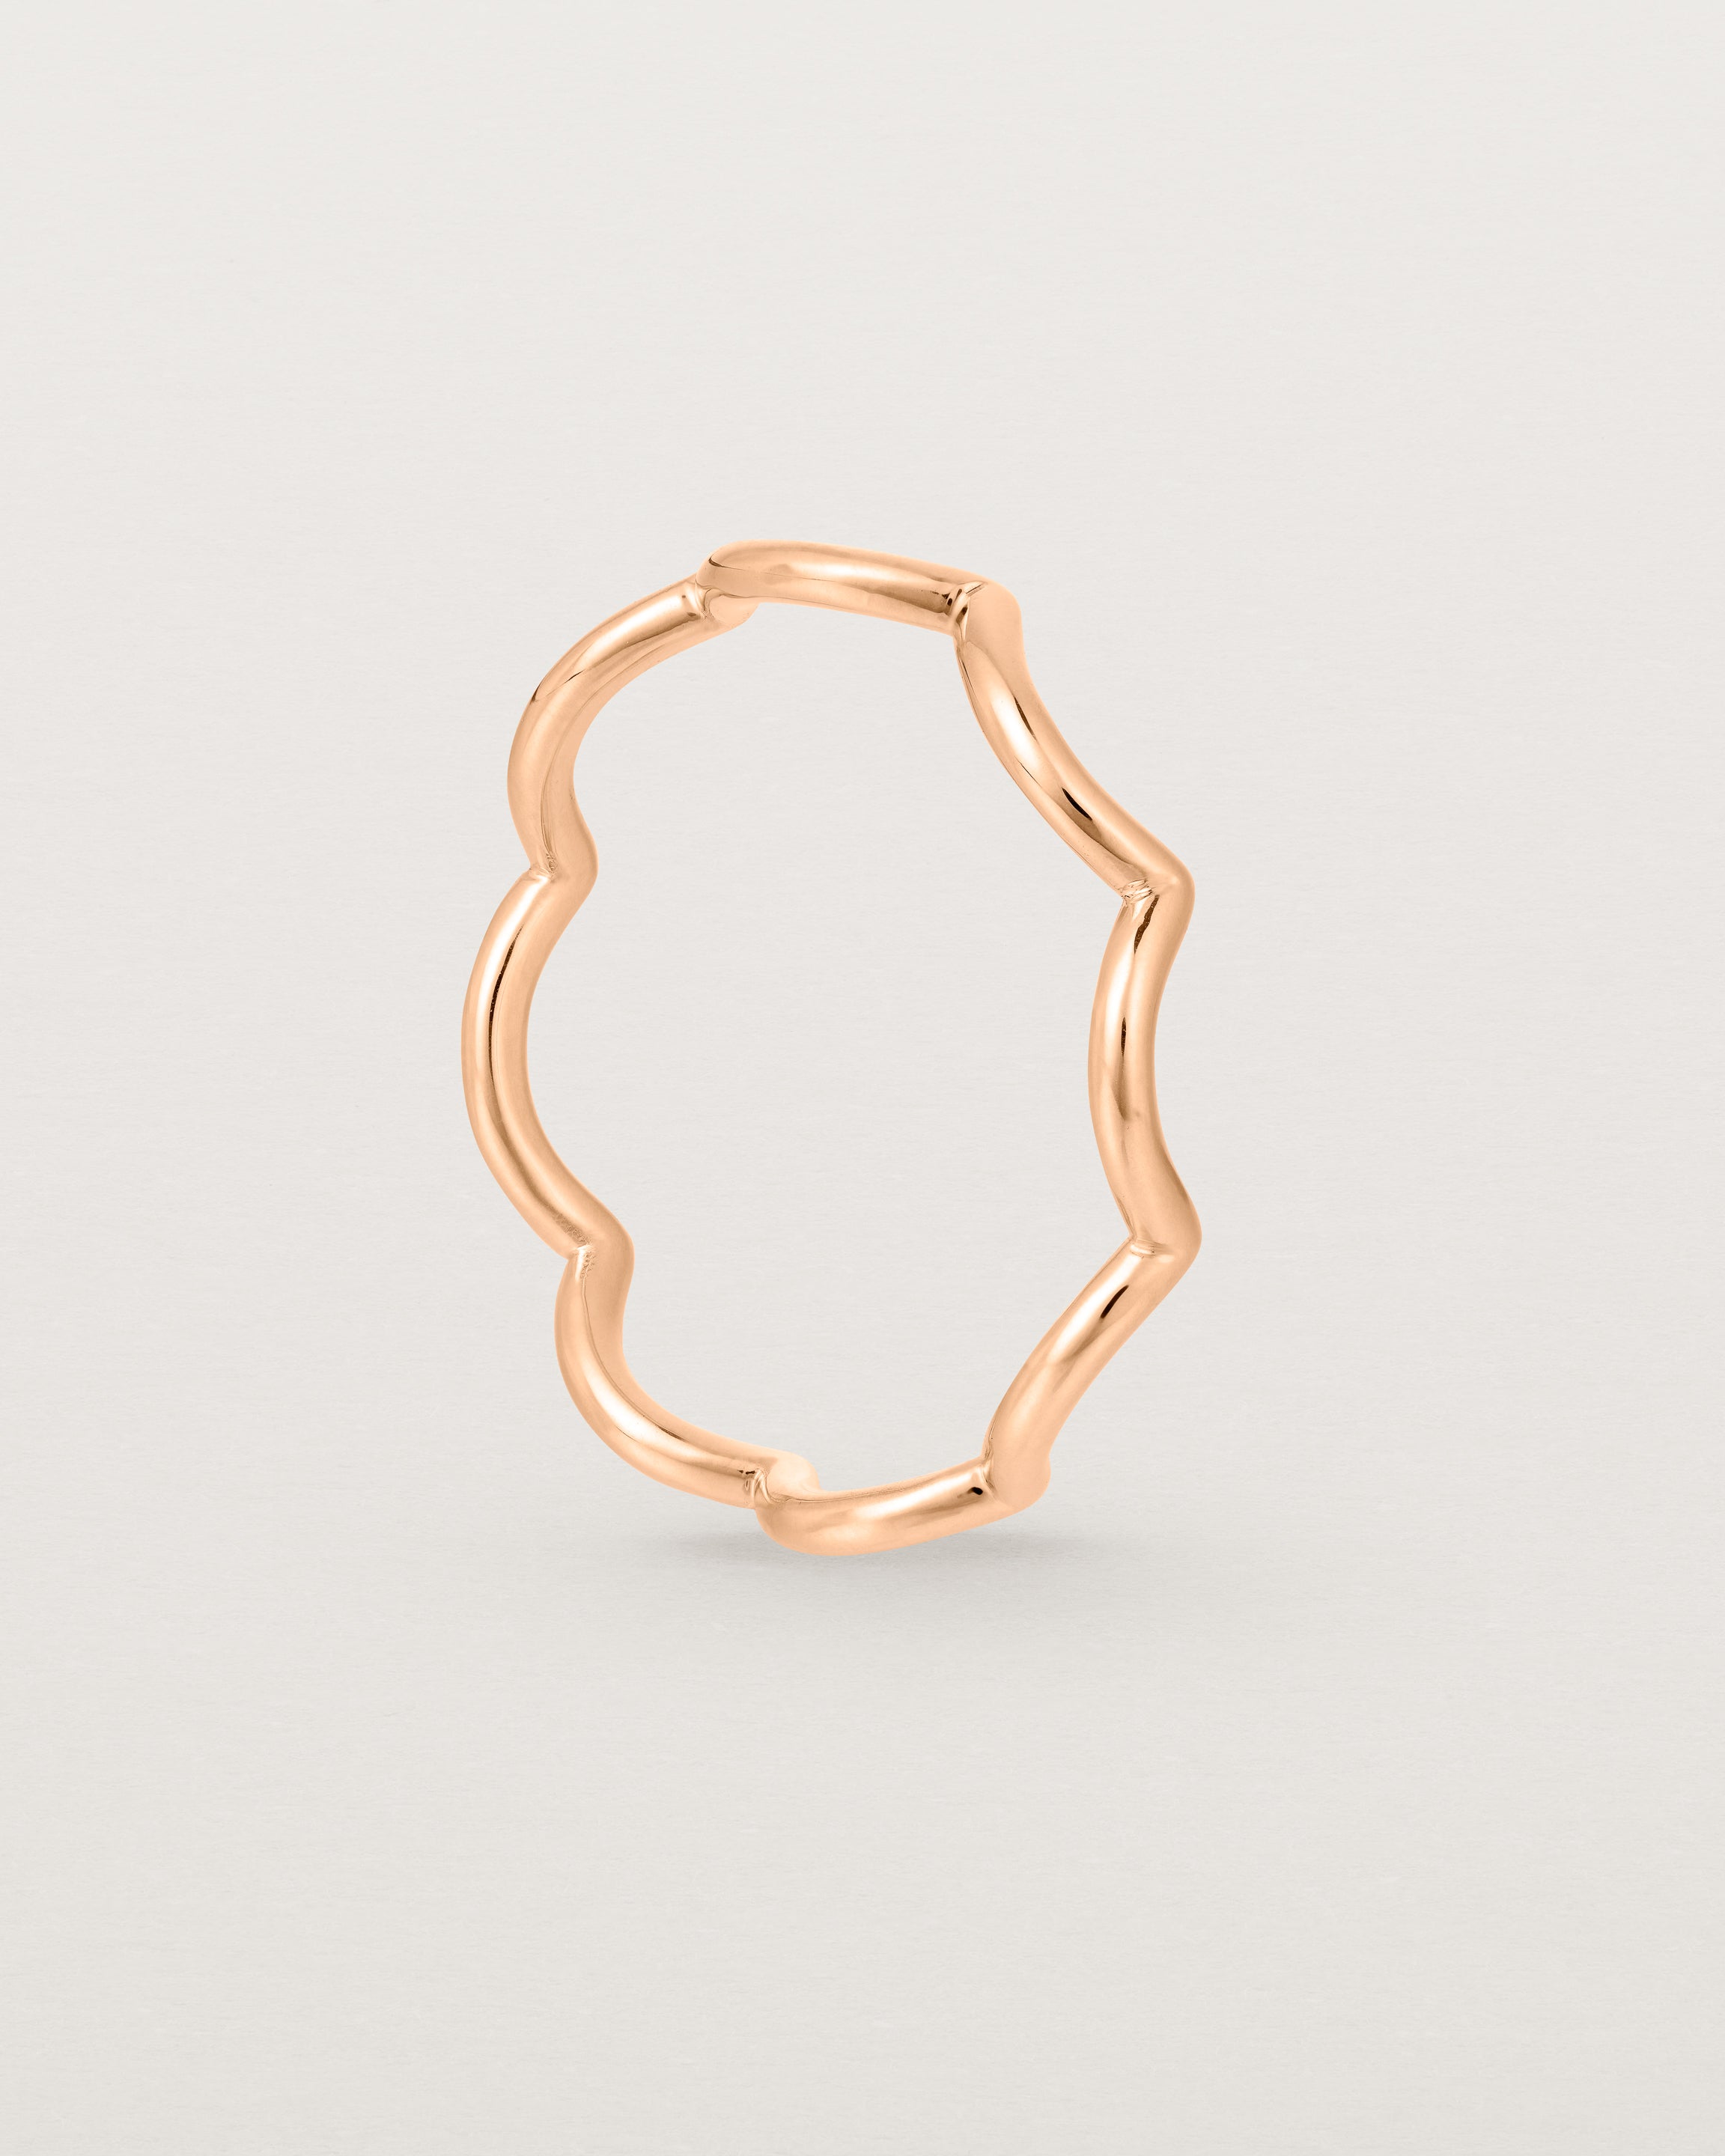 Standing view of the Lai Ring in Rose Gold.